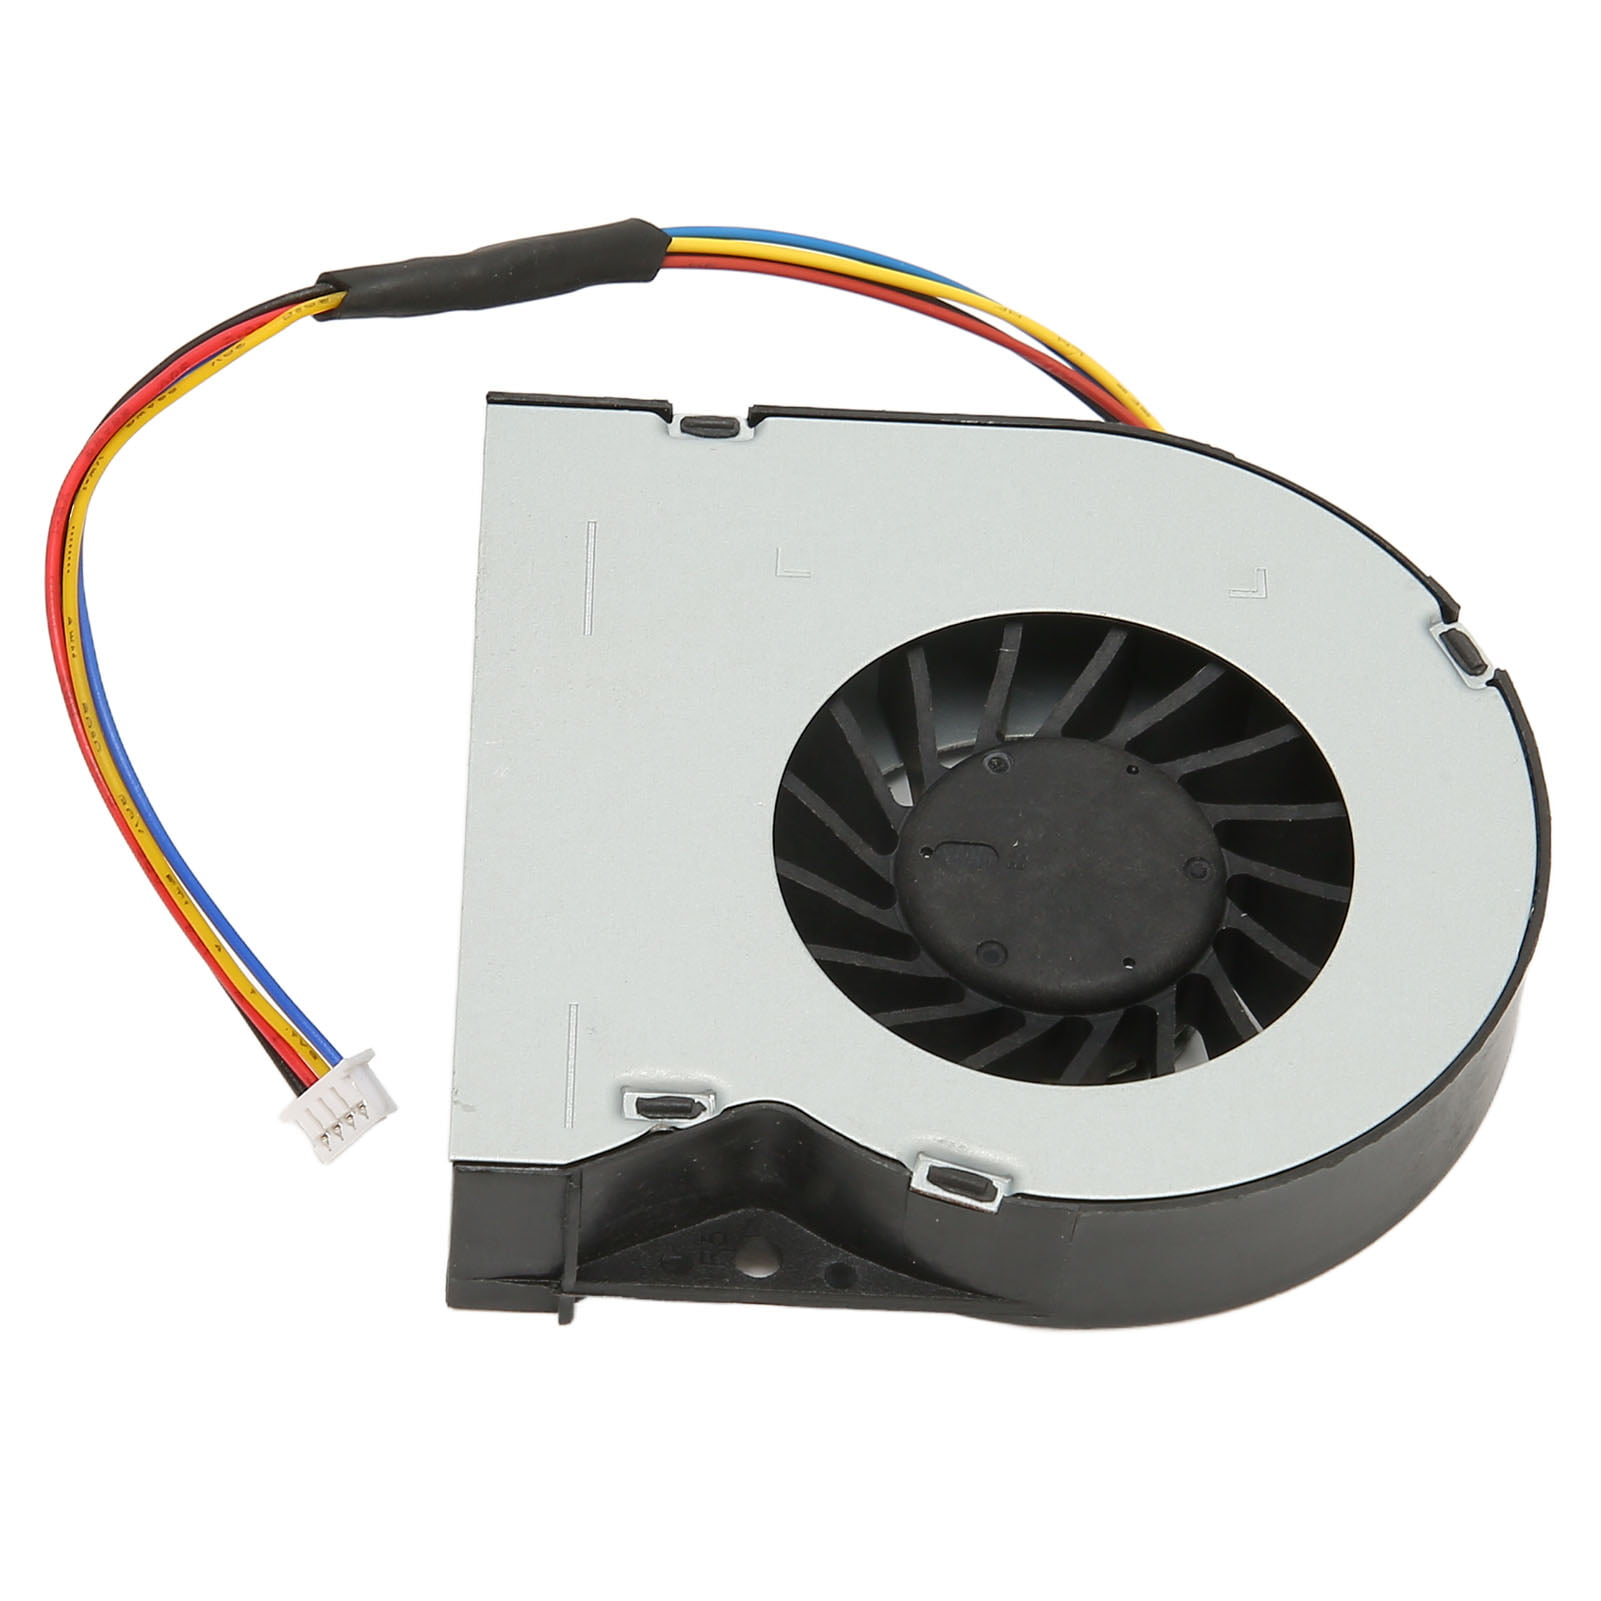 NUC6i7KYK CPU Cooling Fan, Durable ABS 1323 00U9000 CPU Cooling Fan For NUC Kit -